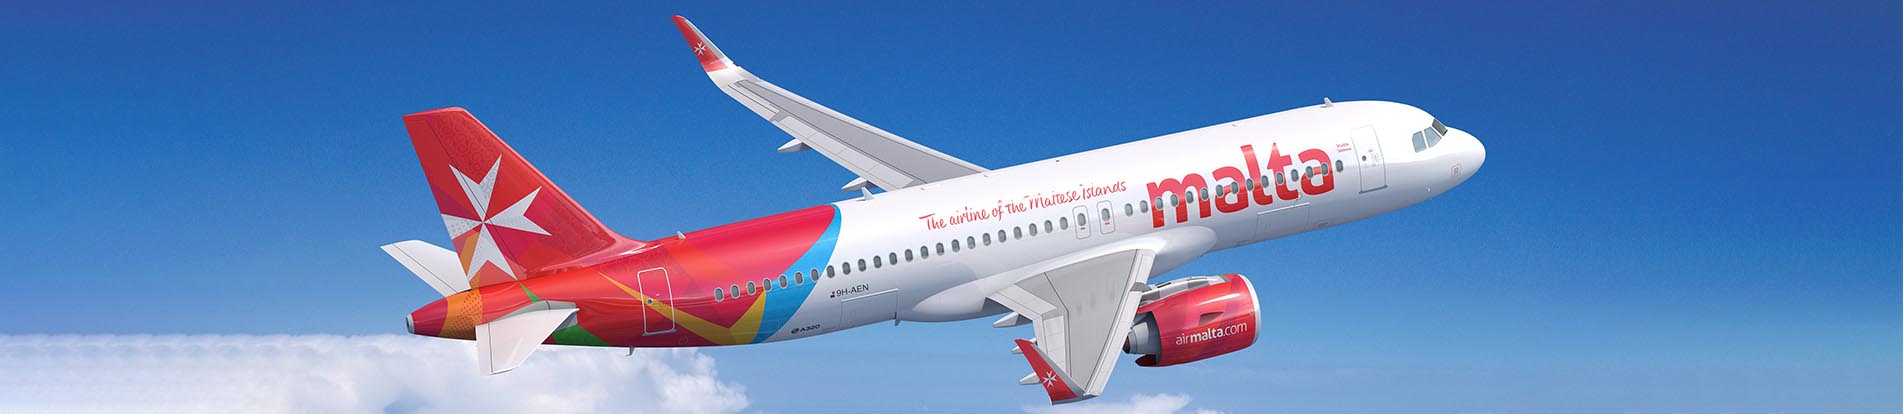 Discover The Brimming Luxury Of Air Travel On Air Malta Flights